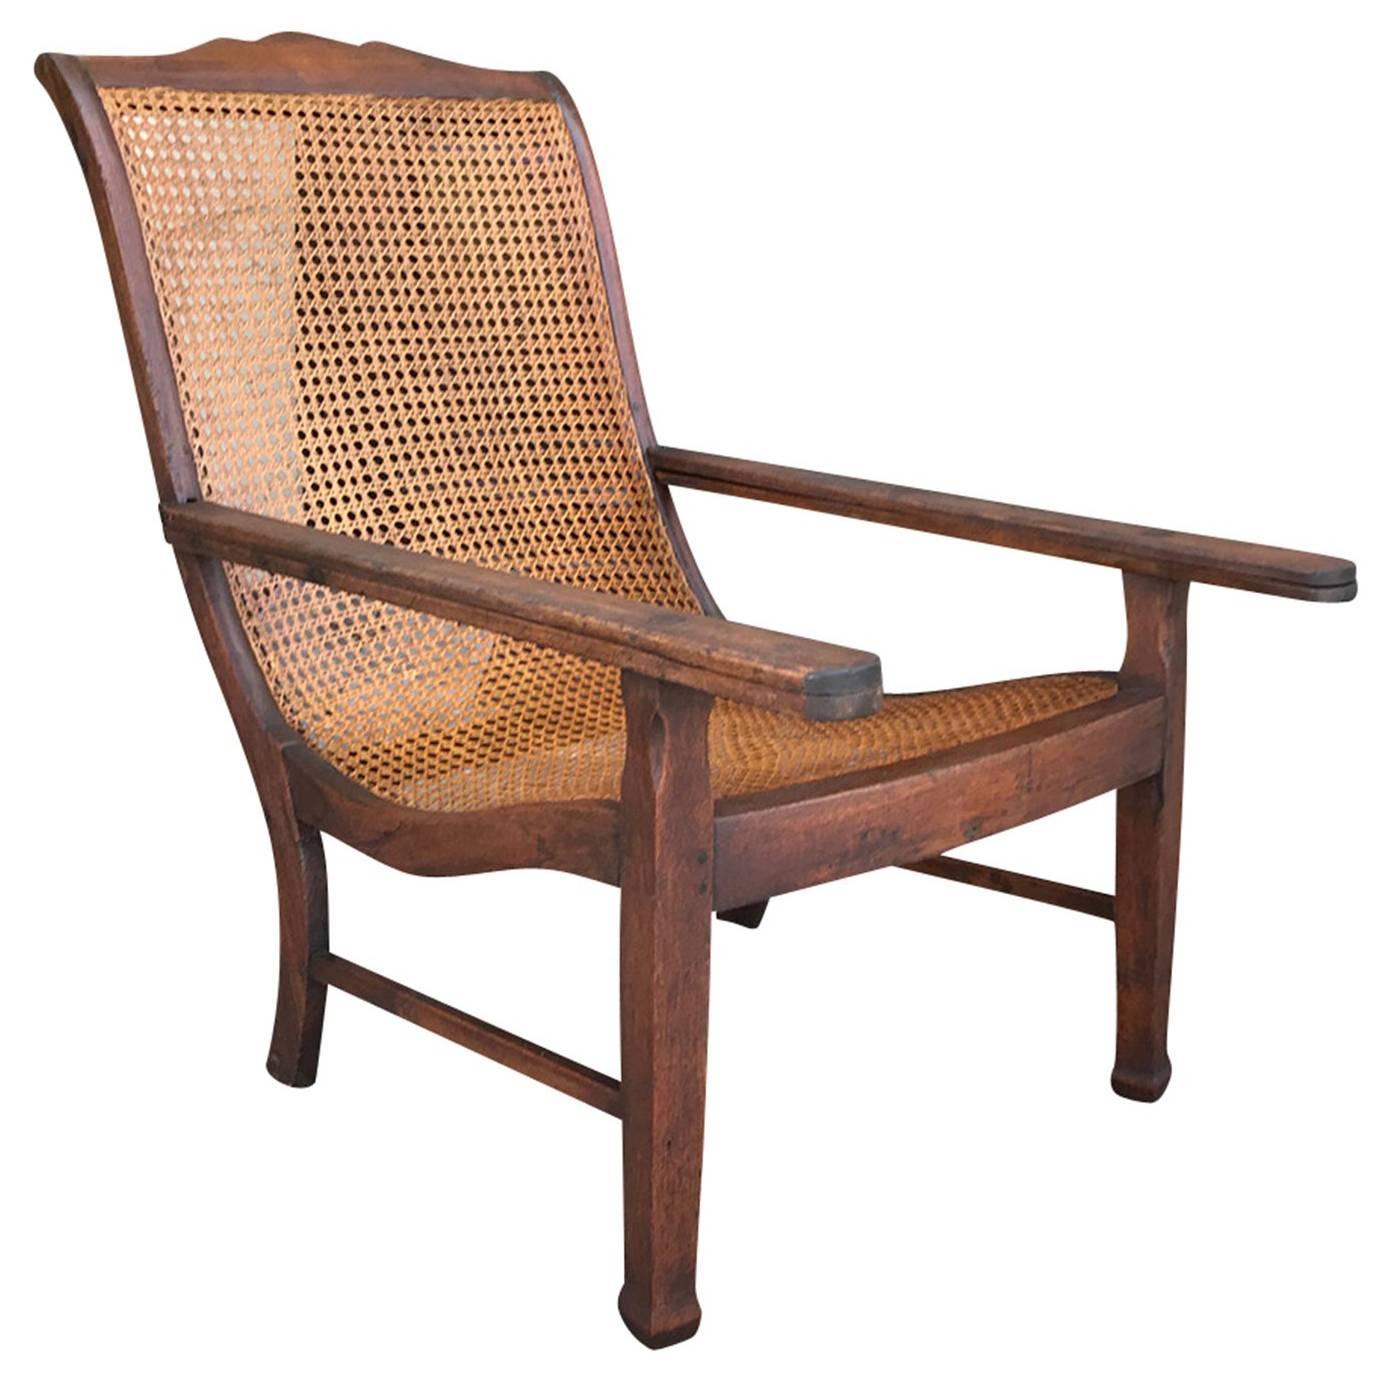 Early 19th Century West Indies Planters Chair